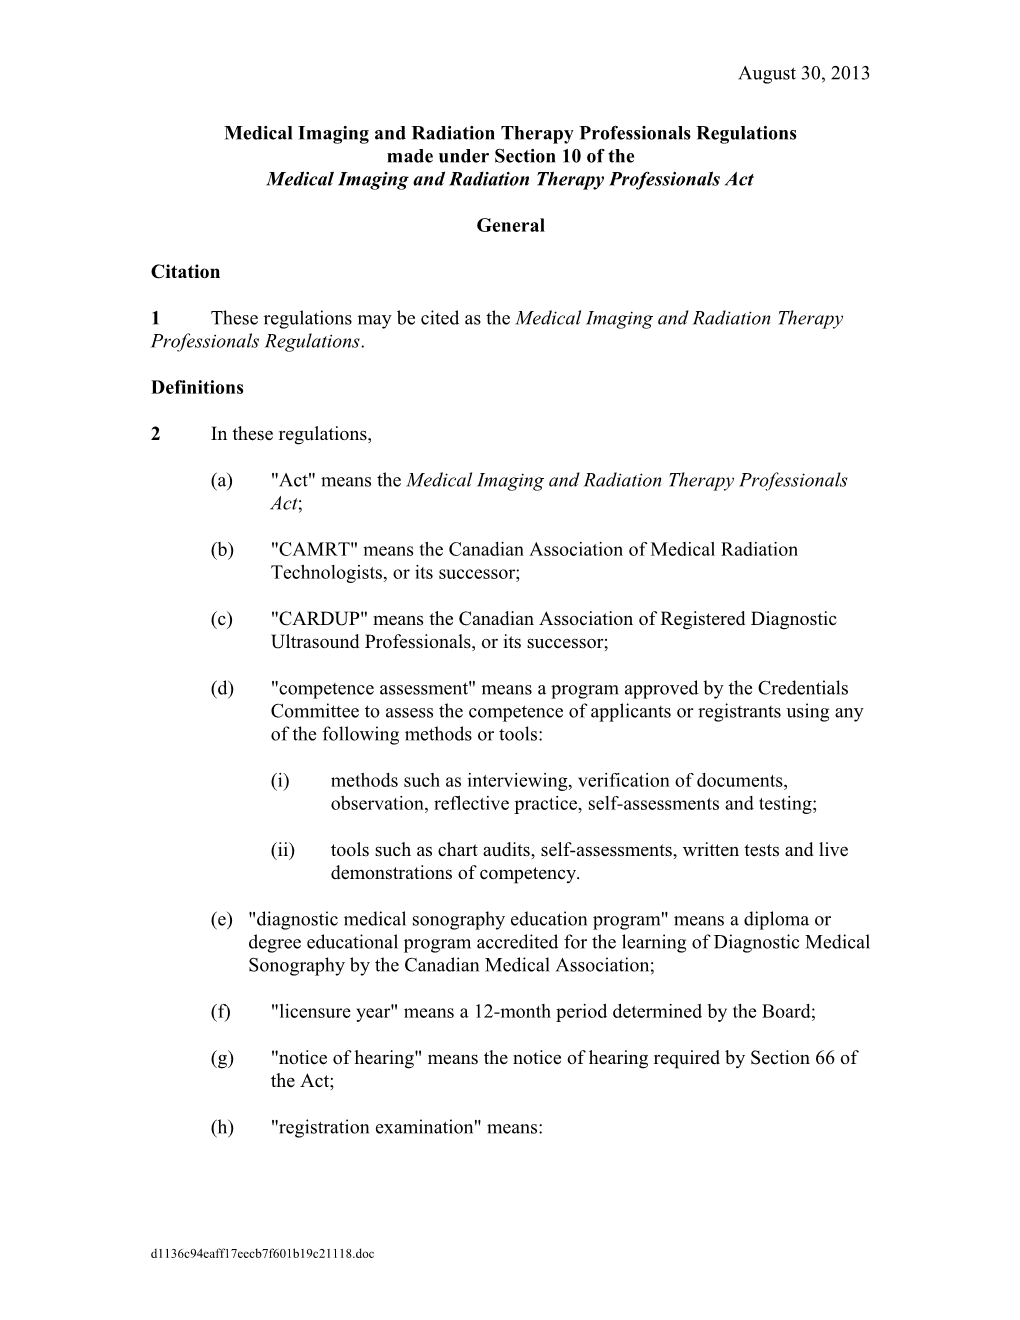 Medical Imaging and Radiation Therapy Professionals Regulations